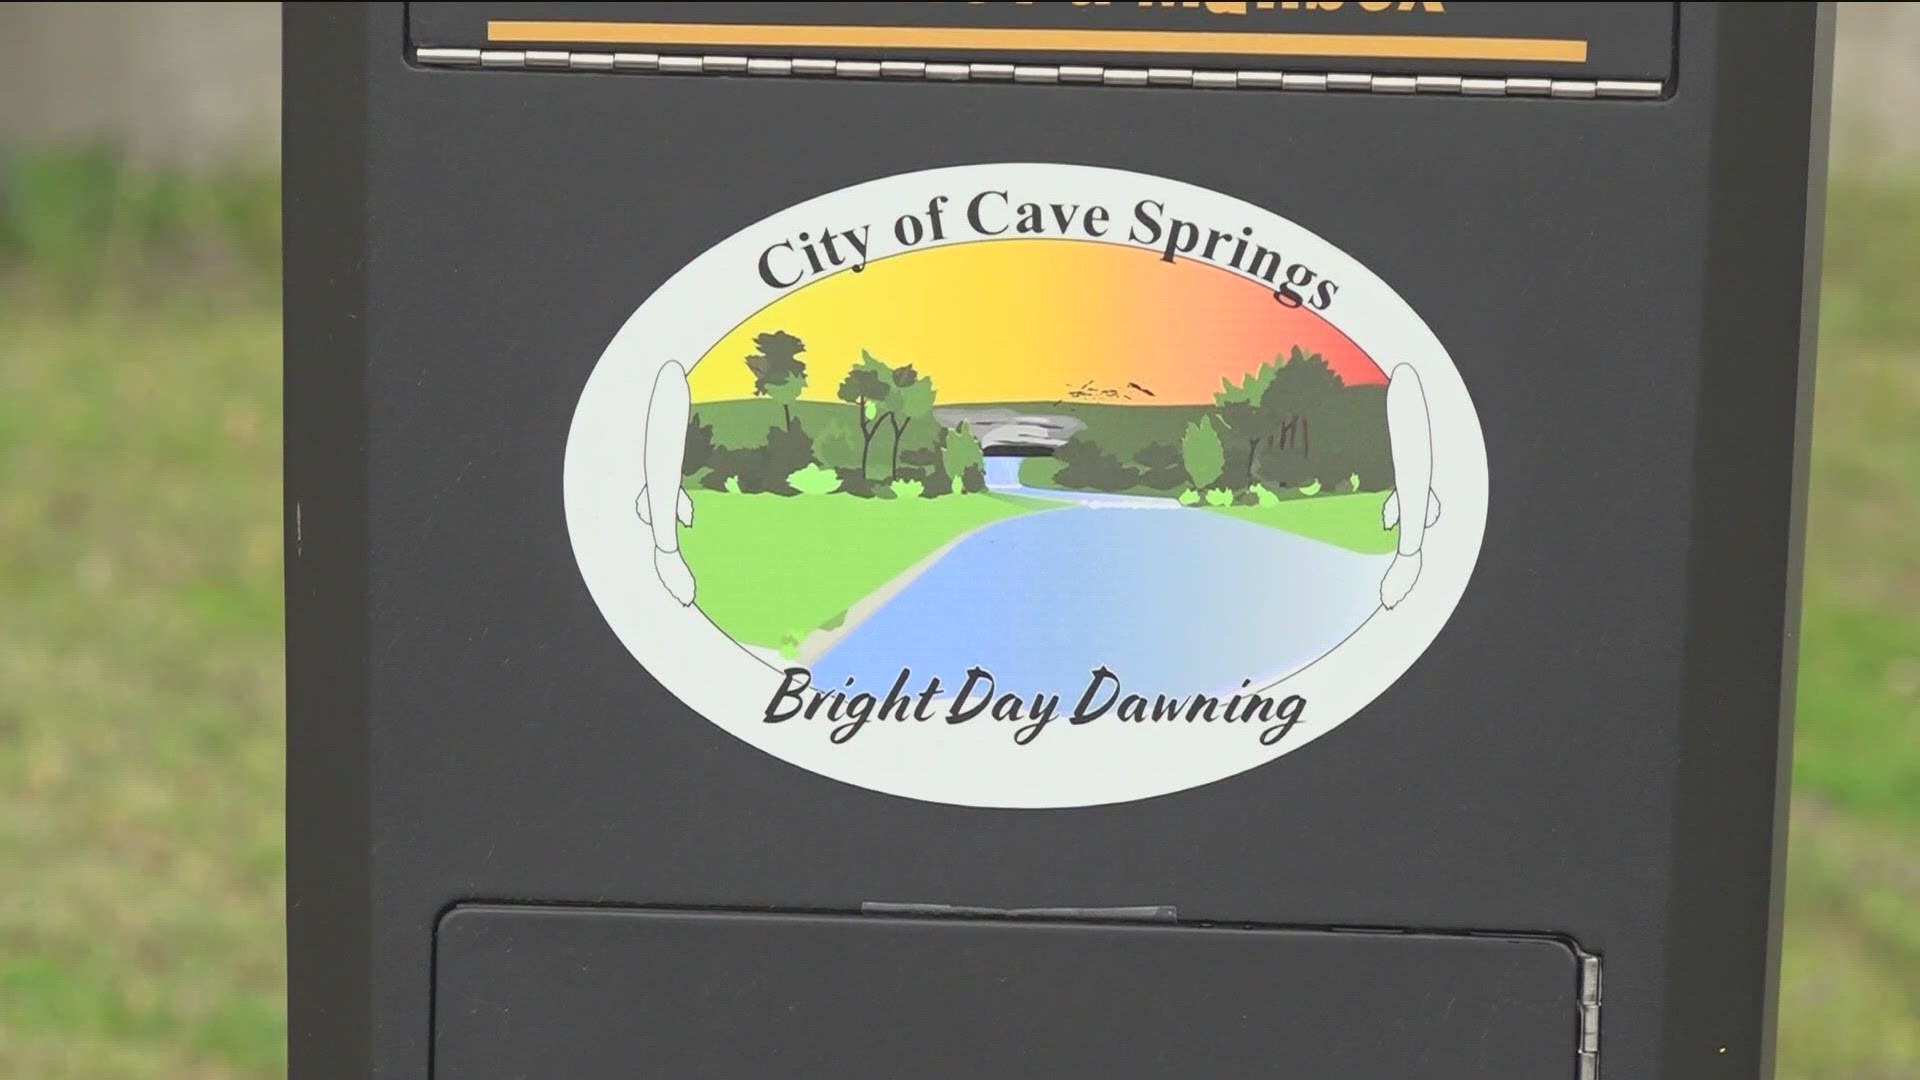 The City of Cave Springs invited the community to share their input on the development of a Cave Springs Downtown Master Plan on March 25.